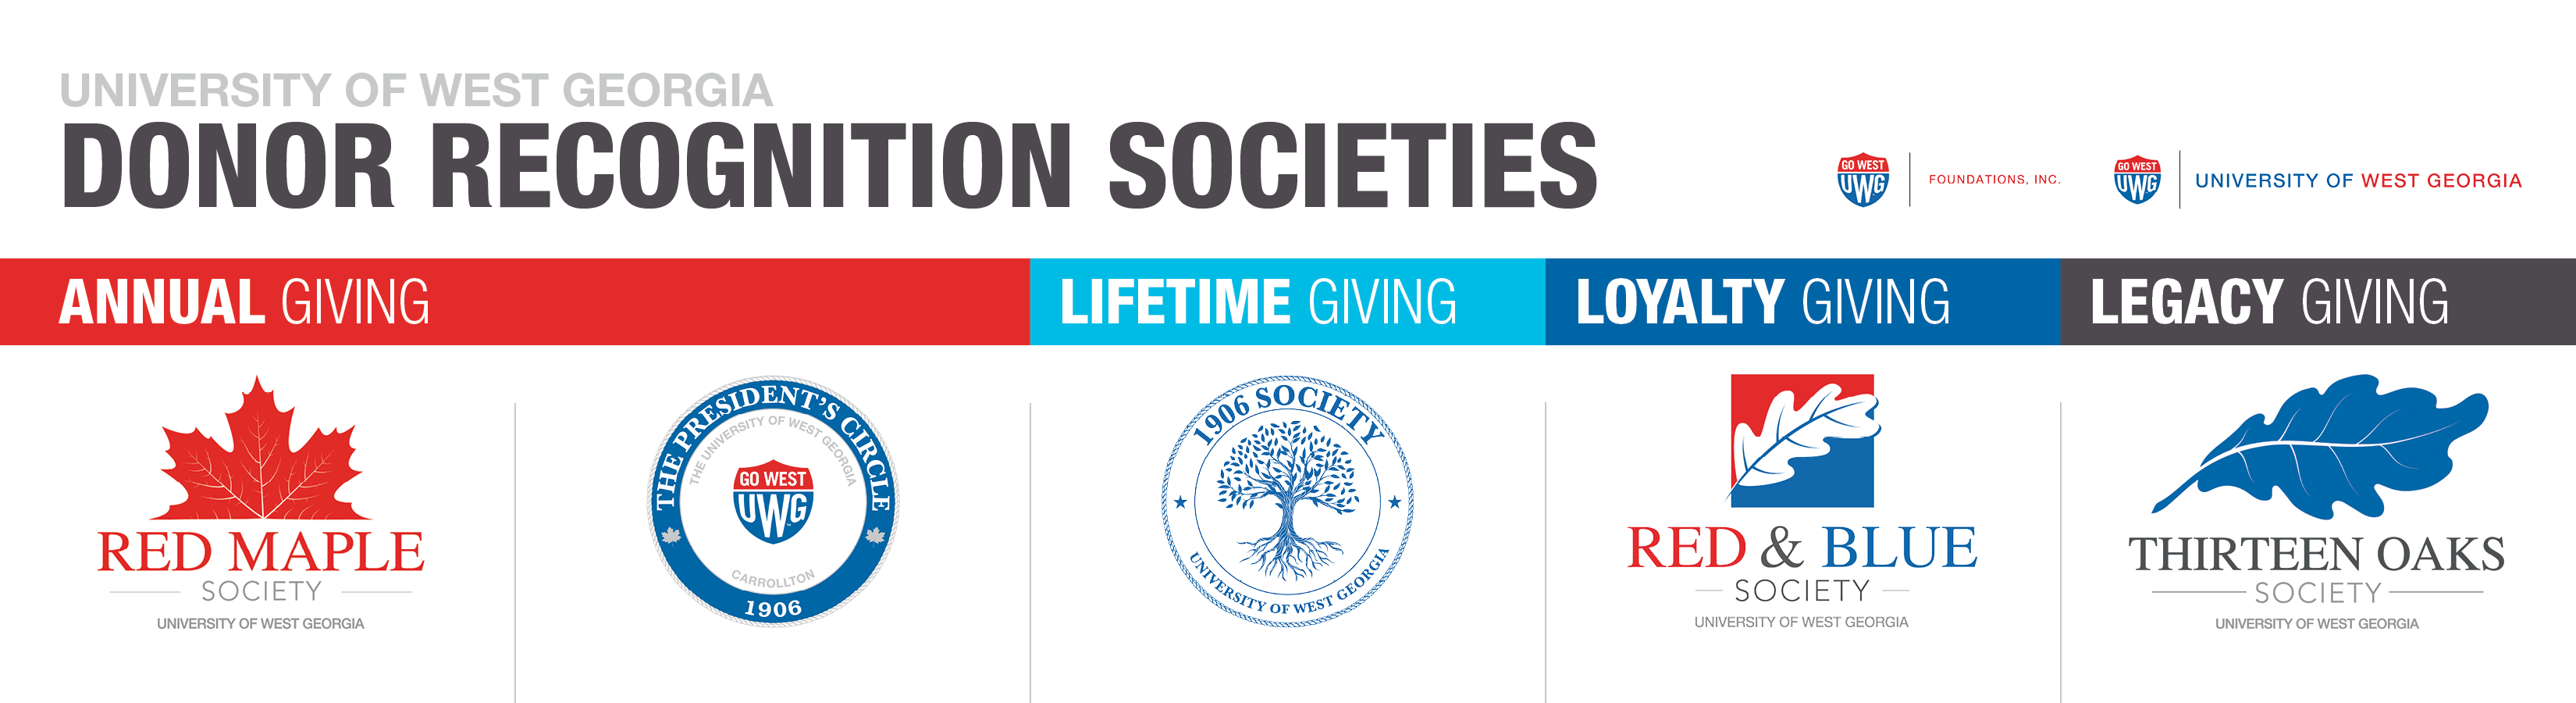 Donor Recognition Societies: Red Maple Society, The President's Circle, 1906 Society, Red & Blue Society, and Thirteen Oaks Society.